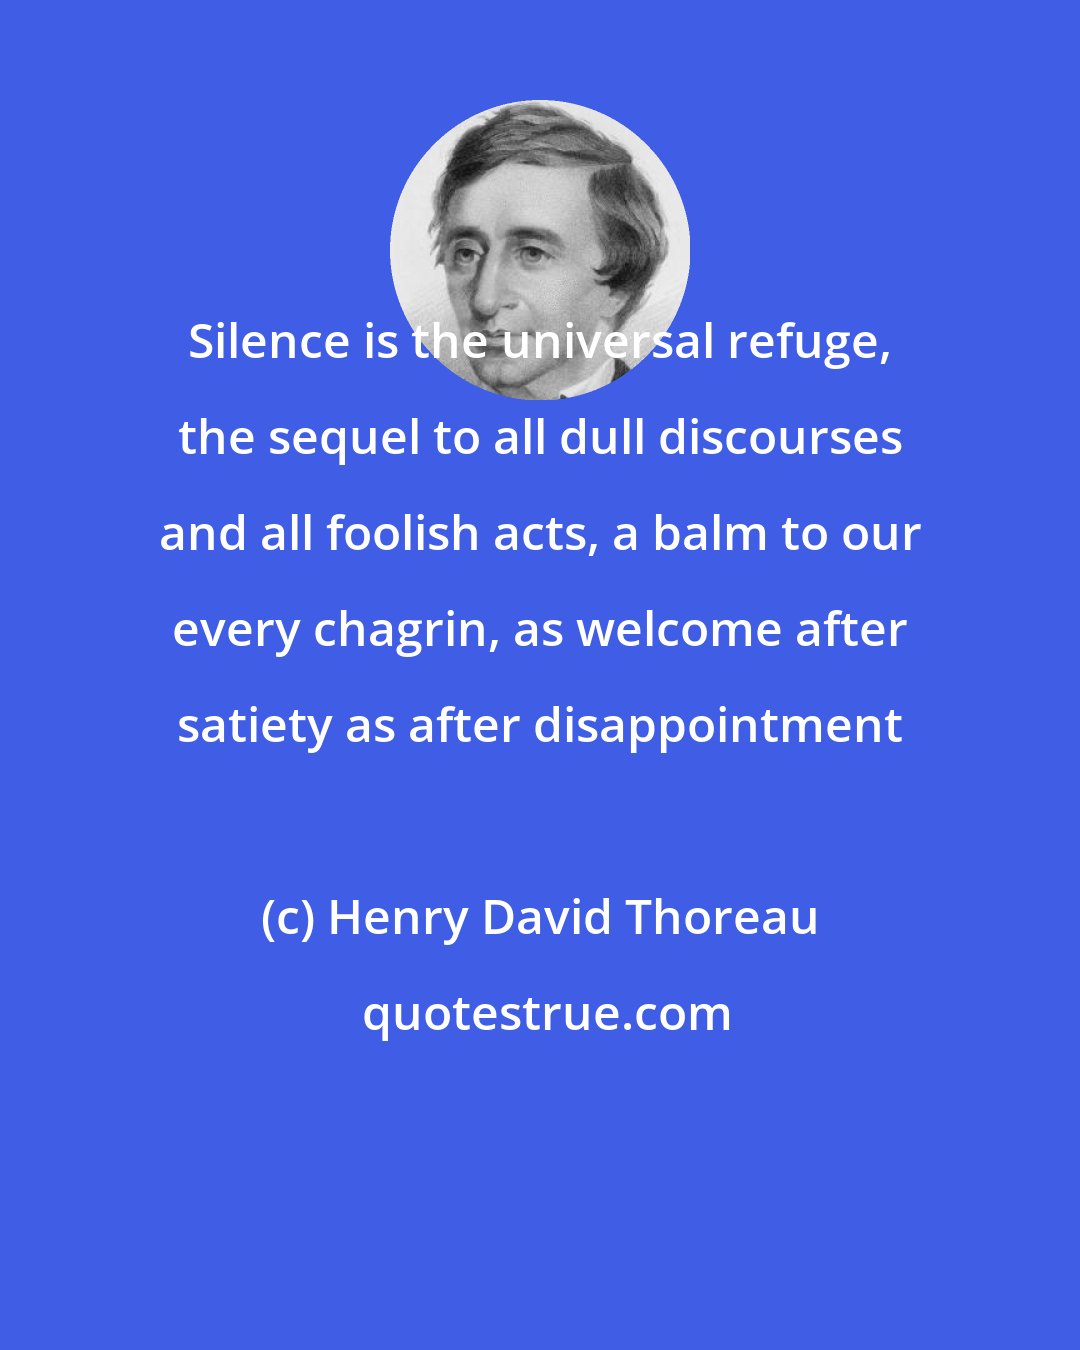 Henry David Thoreau: Silence is the universal refuge, the sequel to all dull discourses and all foolish acts, a balm to our every chagrin, as welcome after satiety as after disappointment